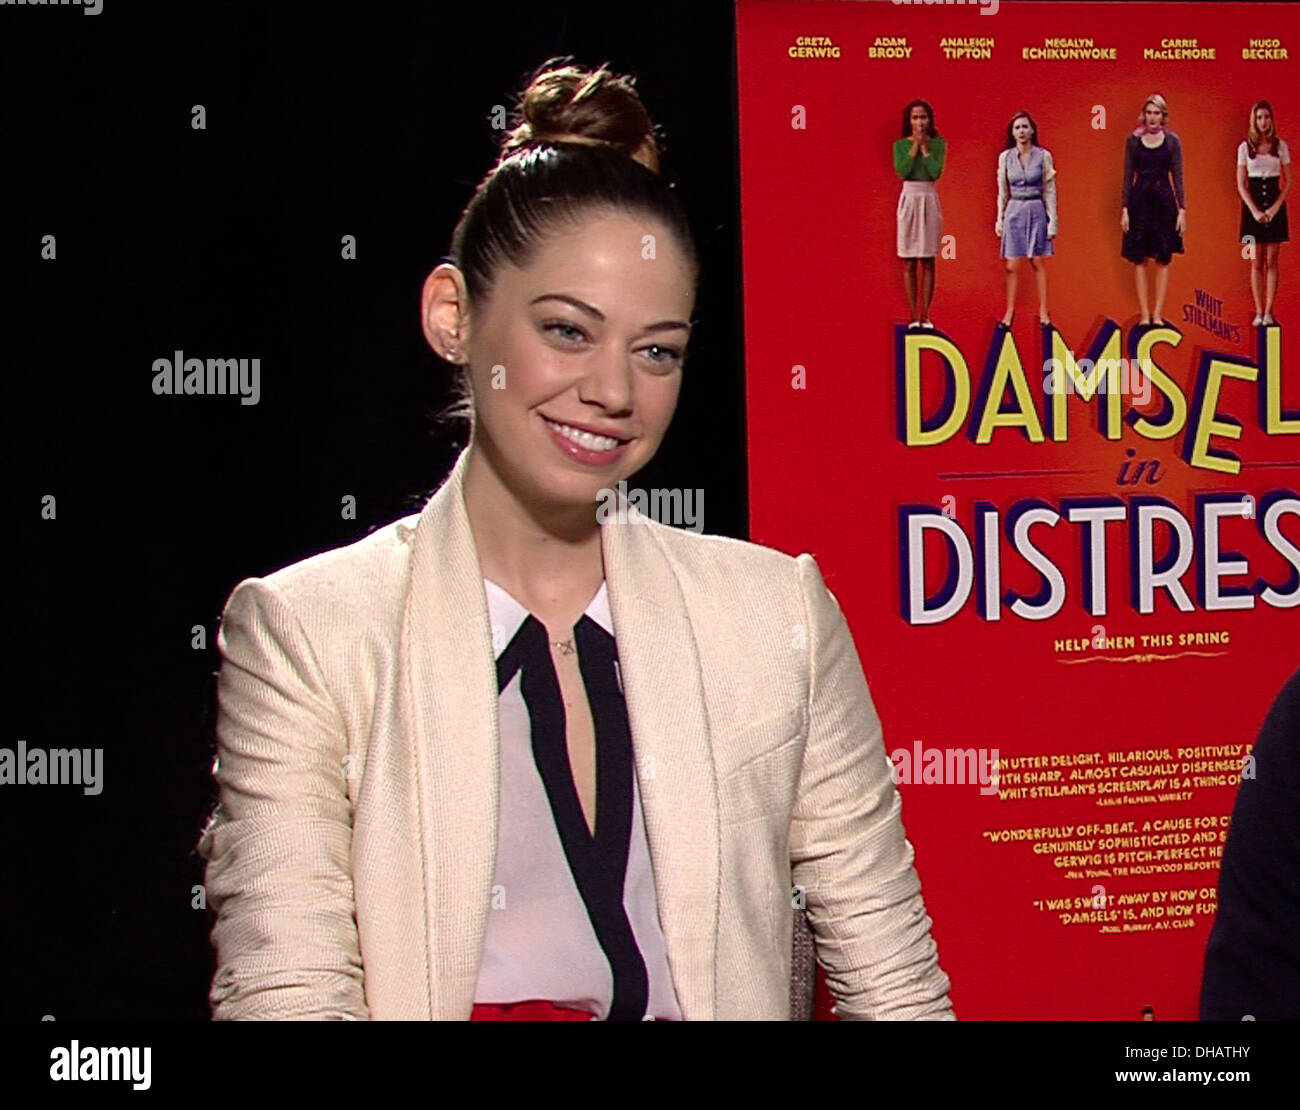 Analeigh Tipton Celebrities promote new movie 'Damsels In Distress' during an interview USA - 15.04.12 Stock Photo